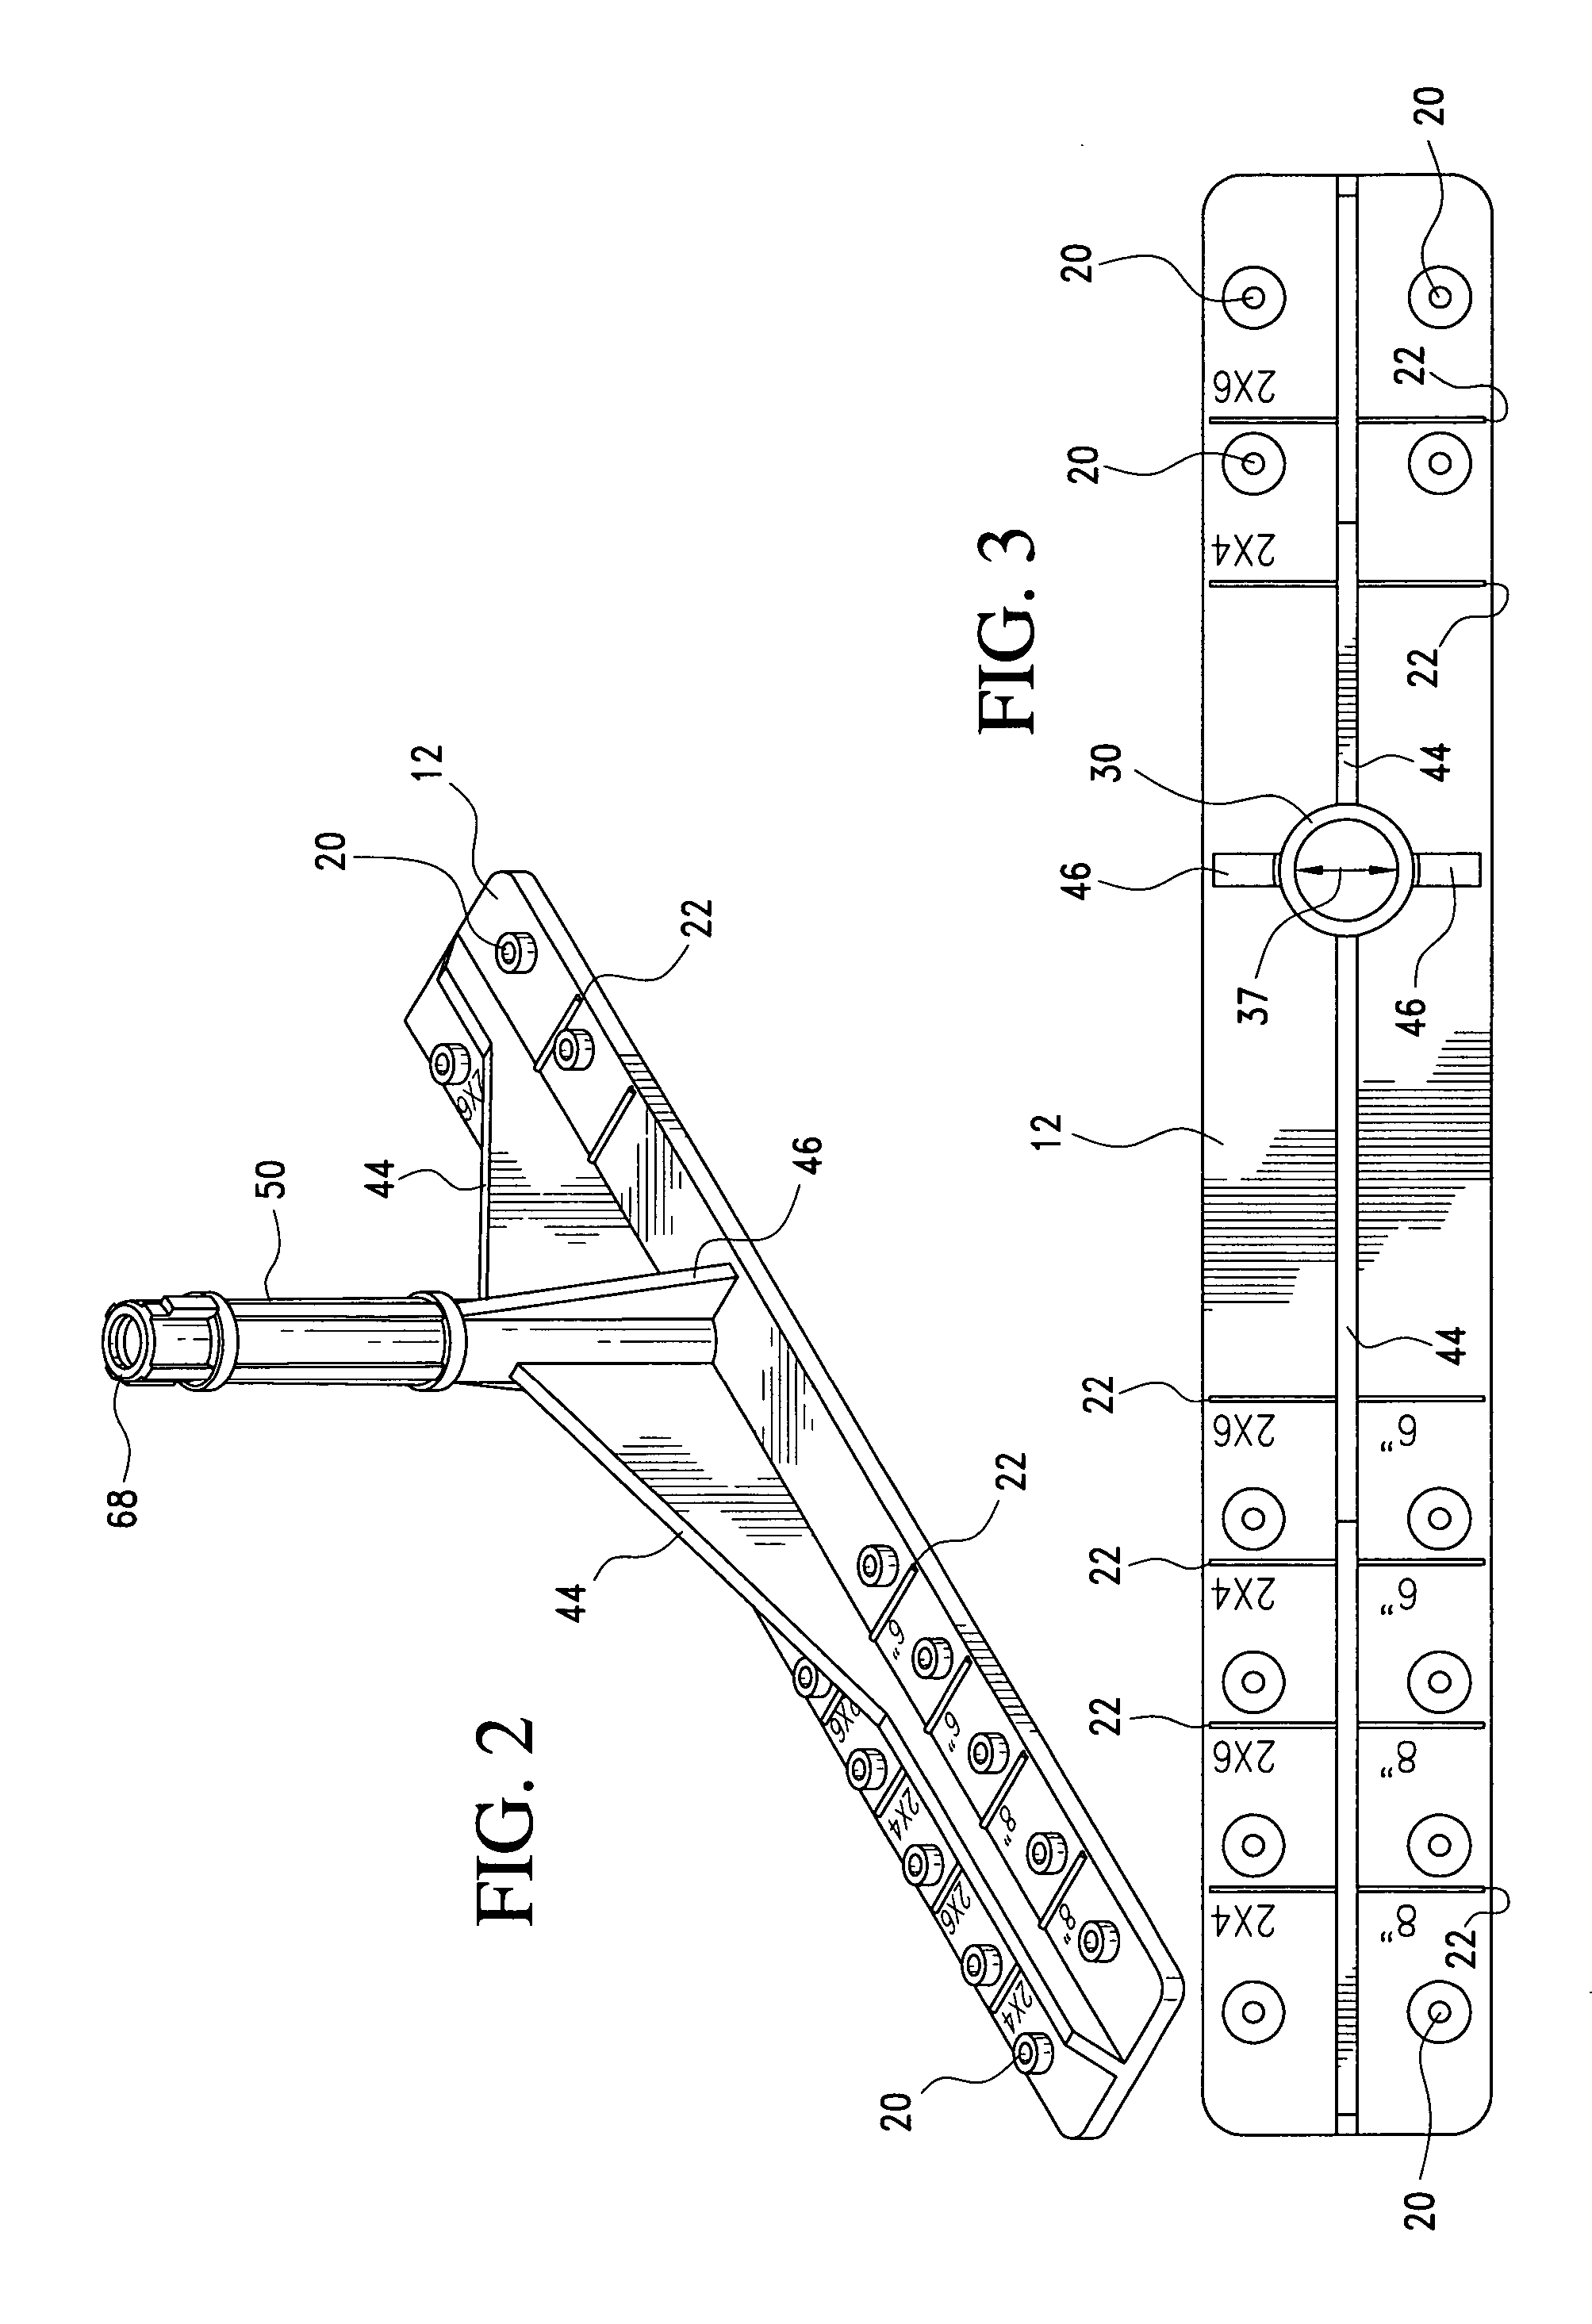 Anchor bolt placement protection assembly and method for aligning structural elements in a form when pouring concrete